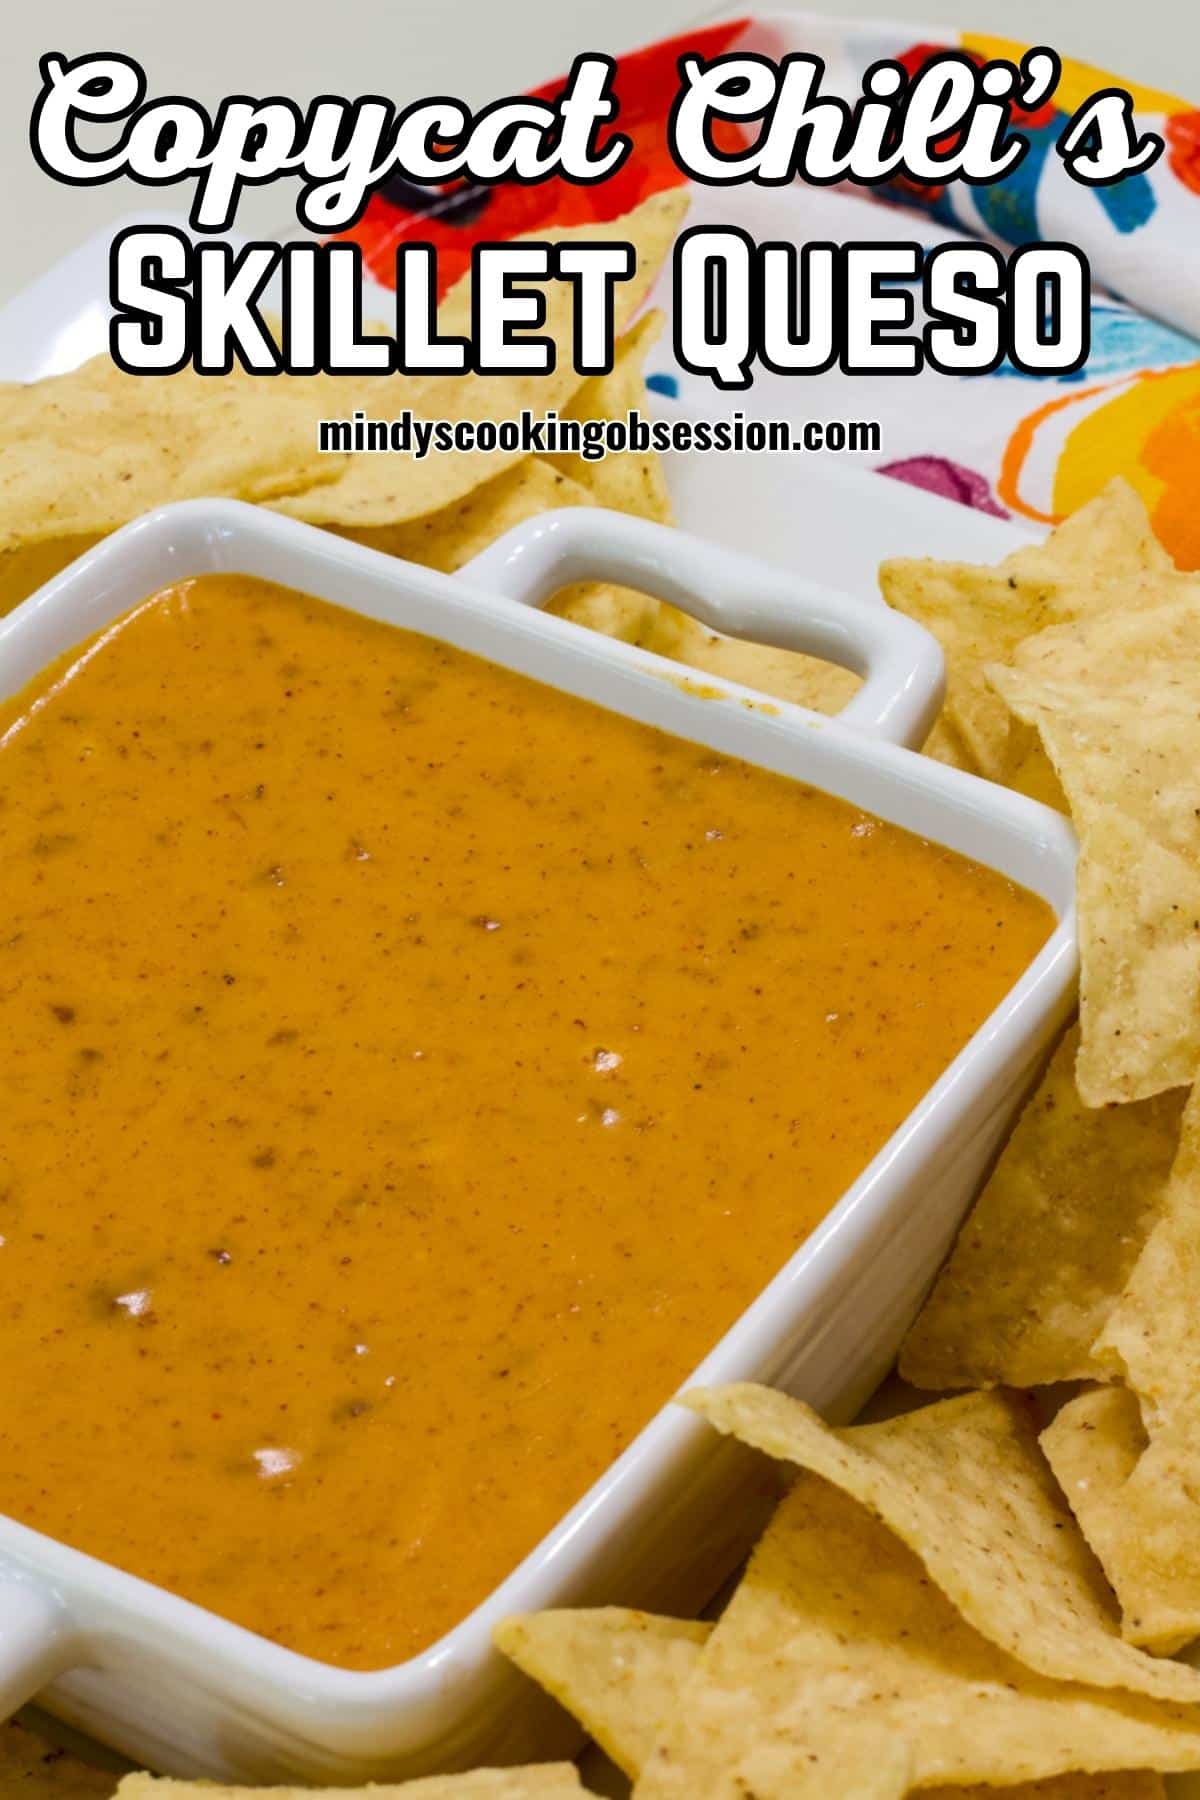 Copycat Chili's Skillet Queso Recipe (no Velveeta) is an easy crowd pleasing chili cheese sauce that is sure to become your go-to dip recipe. Perfect for game day, family gatherings, holiday get-togethers or any time when a delicious cheesy snack is needed. via @mindyscookingobsession